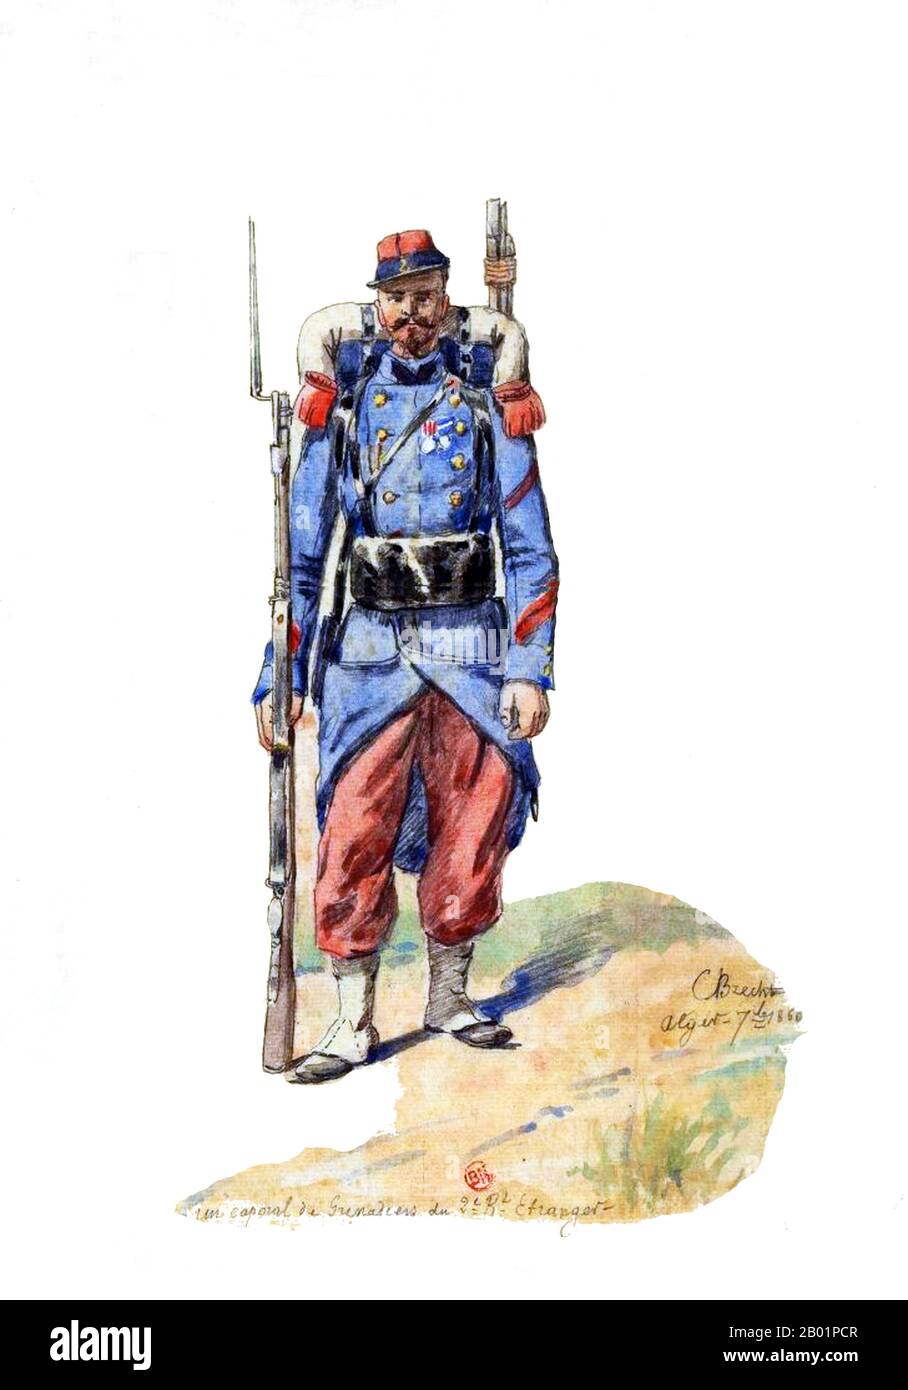 The French Foreign Legion (French: Légion étrangère) is a military service wing of the French Army established in 1831, unique because it was exclusively created for foreign nationals willing to serve in the French Armed Forces. Commanded by French officers, it is also open to French citizens, who amounted to 24% of the recruits as of 2007. Stock Photo